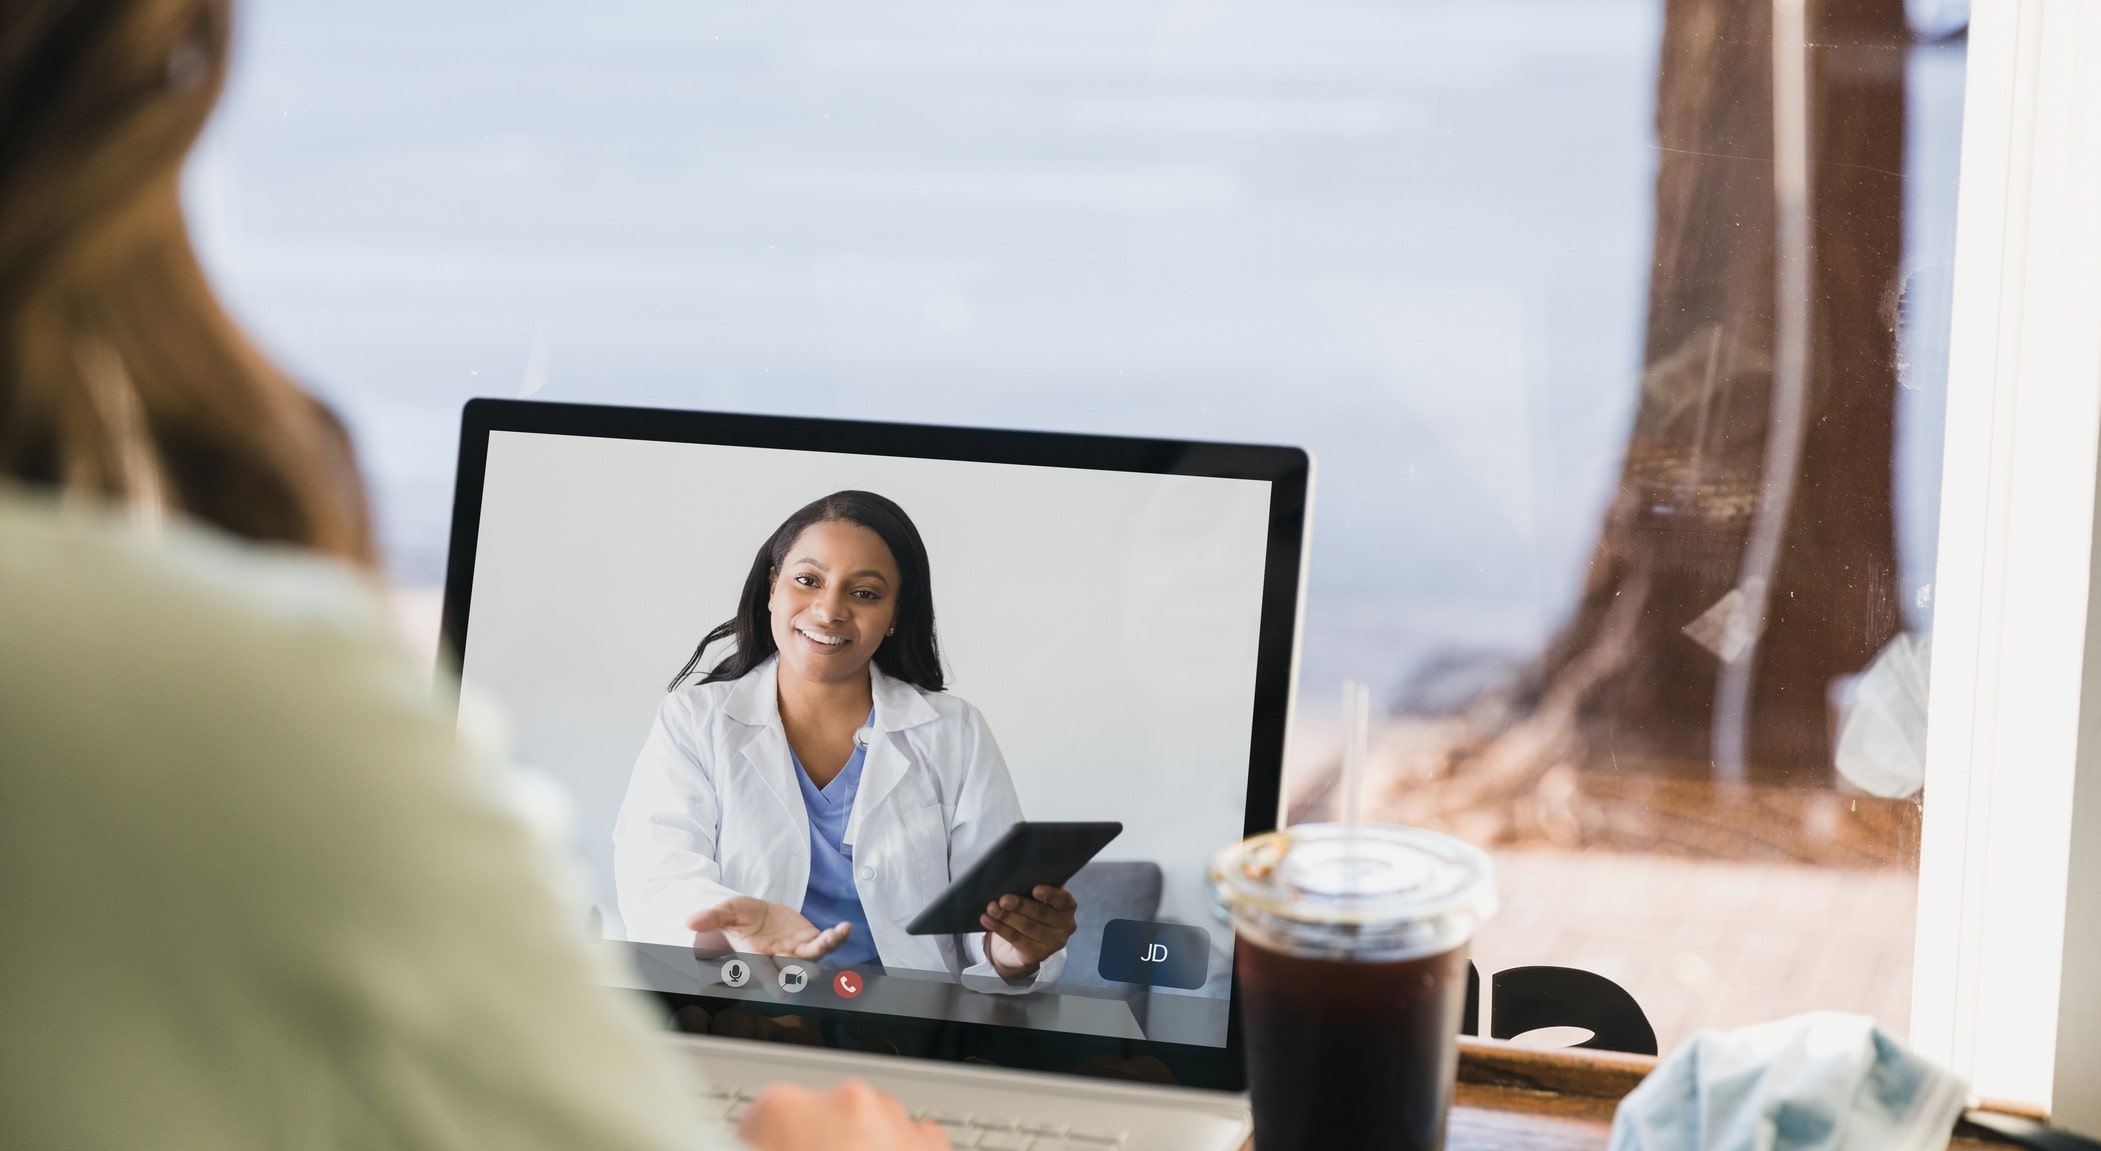 Physician meeting with a patient on a telehealth visit